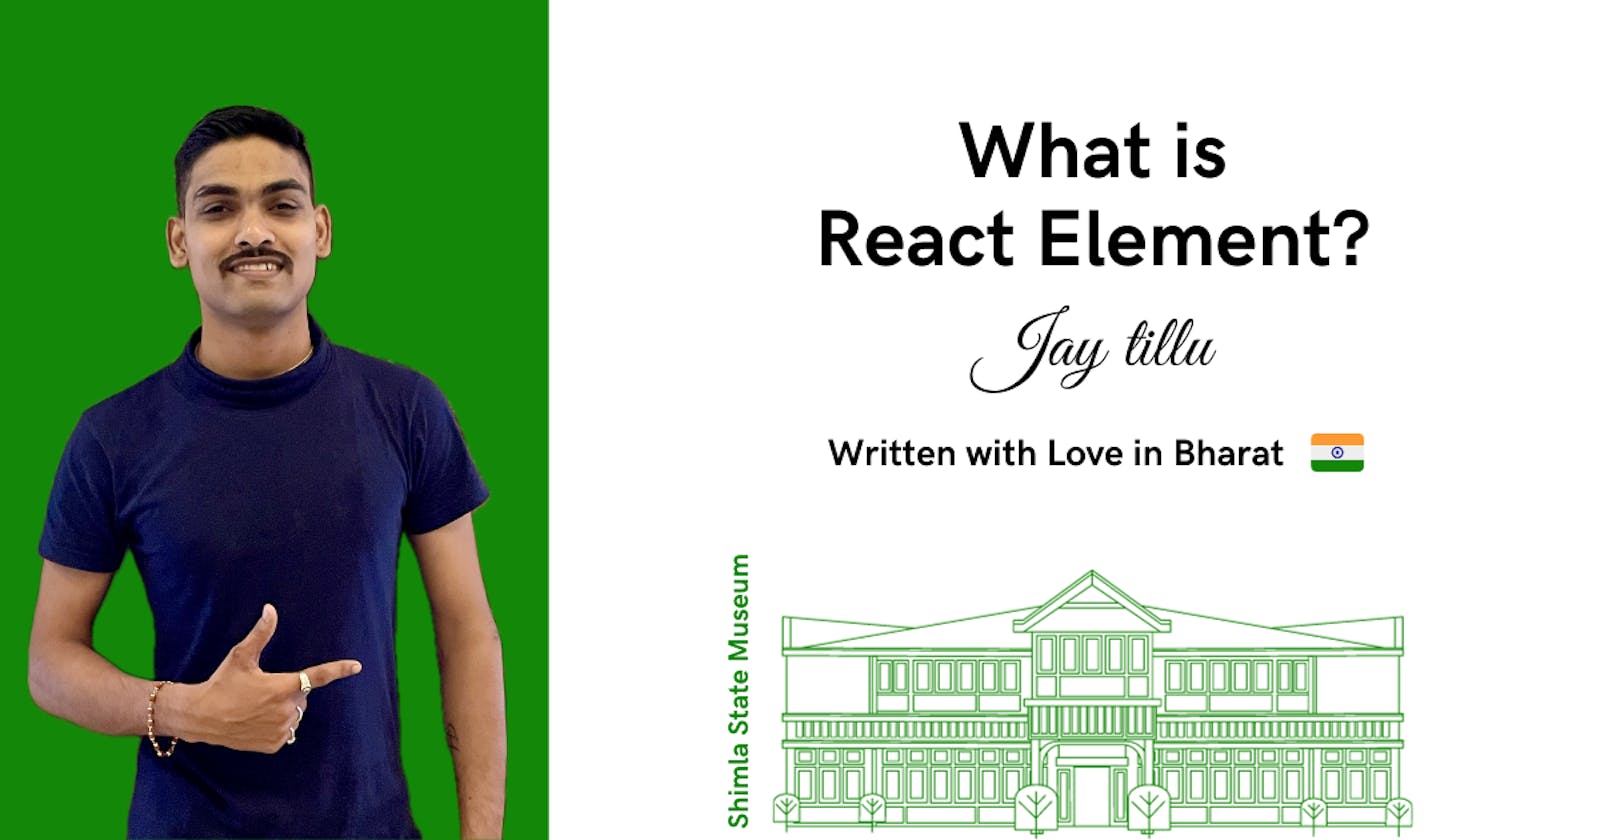 What is React Element?